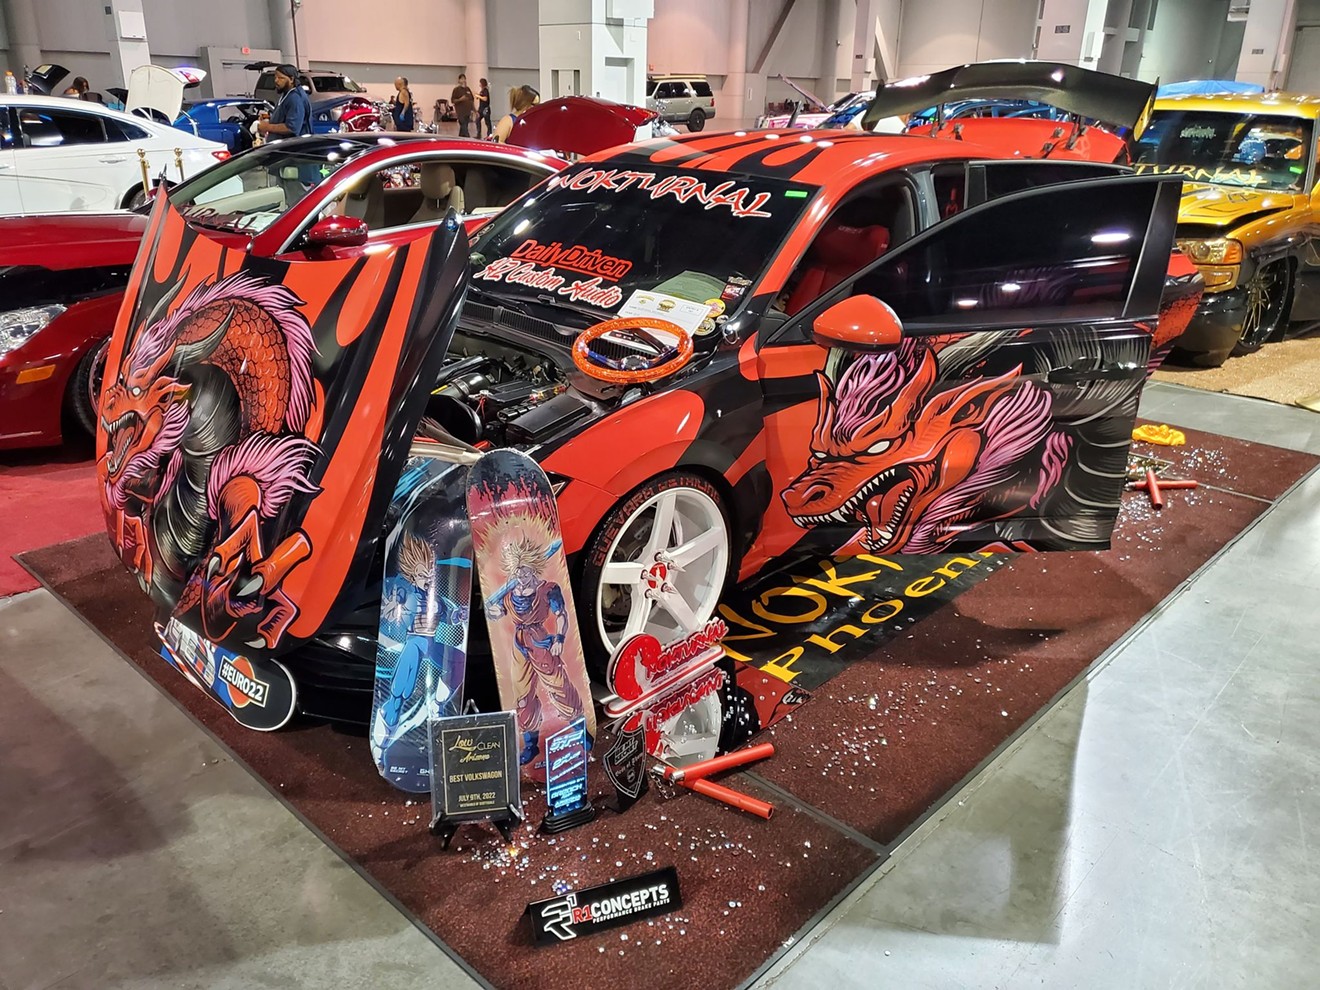 Michael Guevara of north Phoenix took the Best of Show trophy at the BeMySecret Cars & Anime Con with his 2019 Volkswagen Jetta last year.